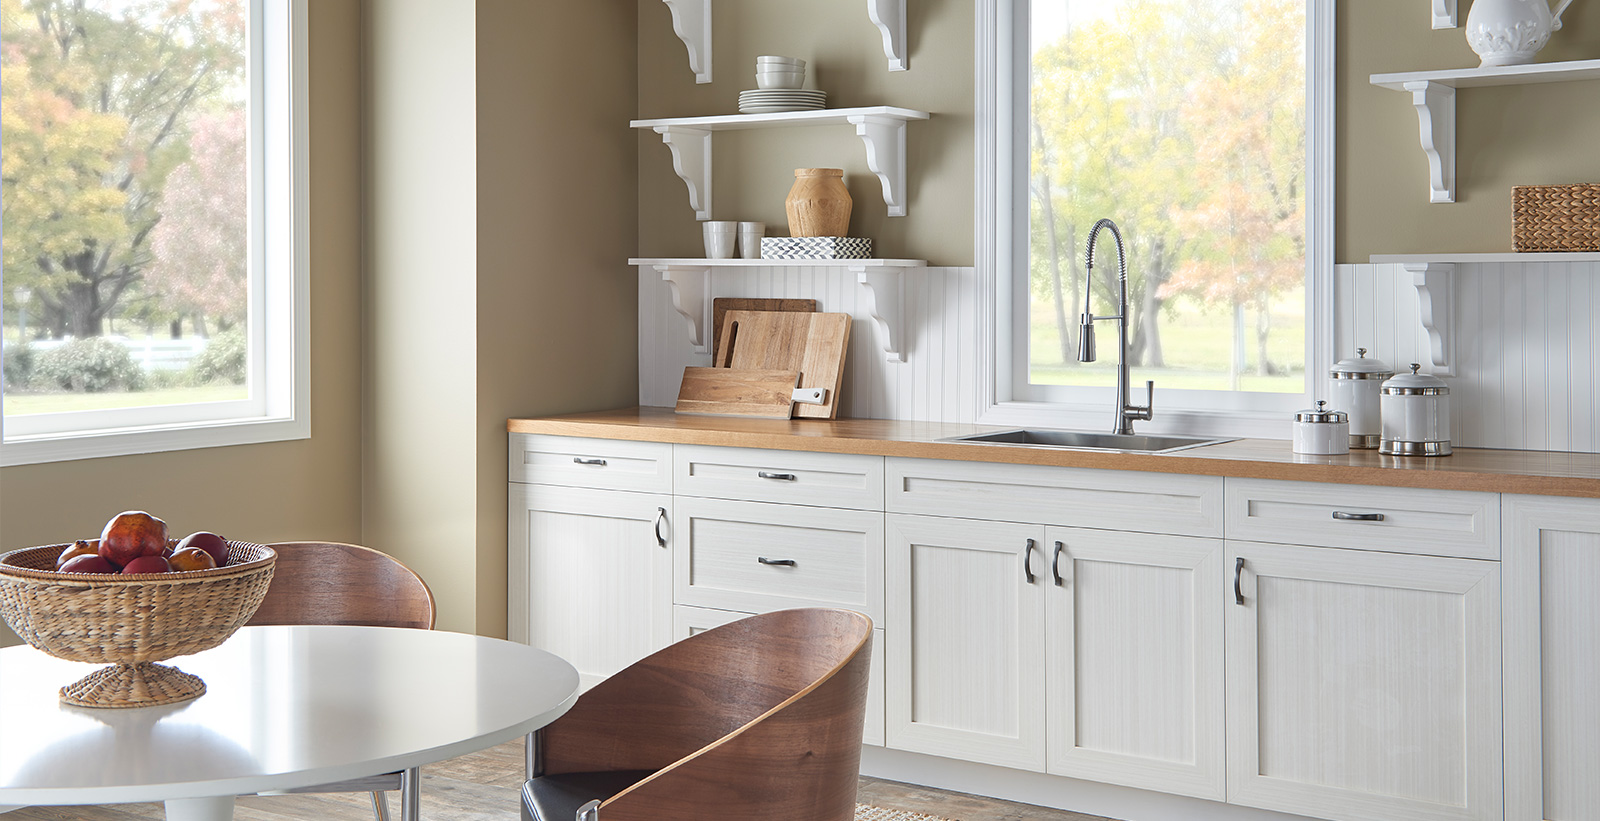 Casual kitchen with tan on wallls, white on cabinets and trim, and wooden counter top